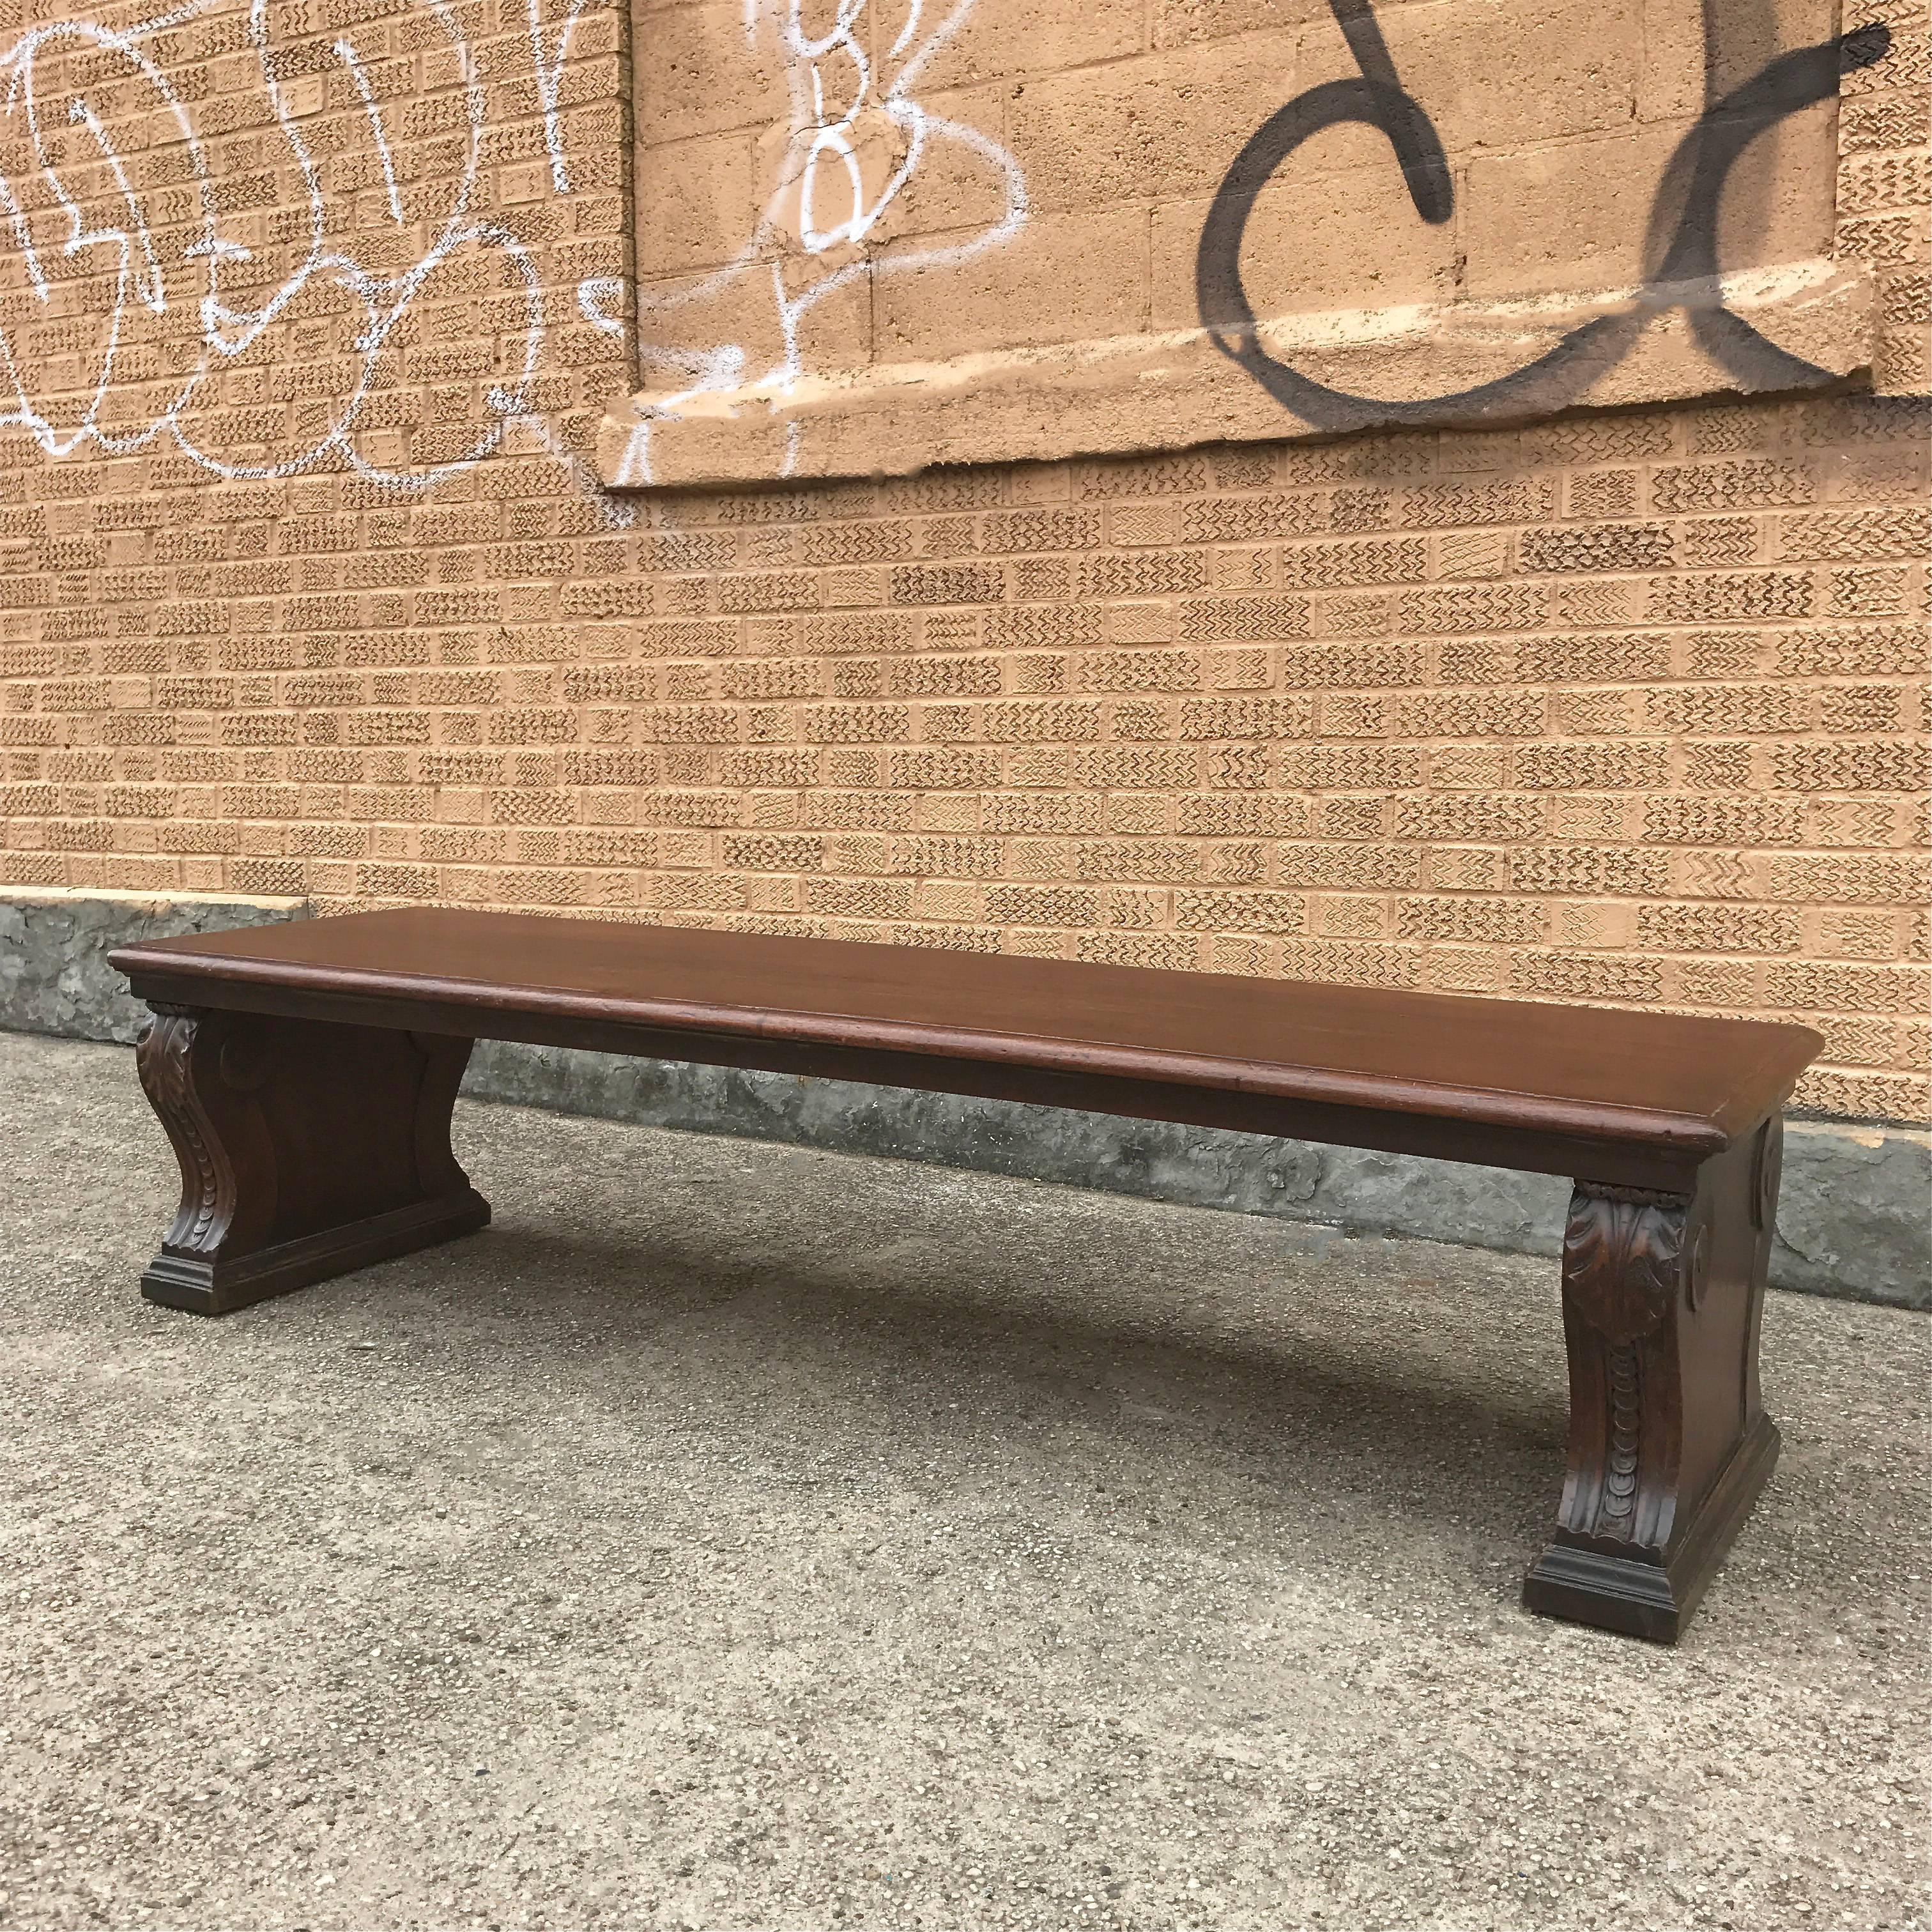 Stately, early 20th century, antique, carved mahogany, 6 ft, municipal bank, library, courthouse bench is originally from in a Brooklyn NY bank.